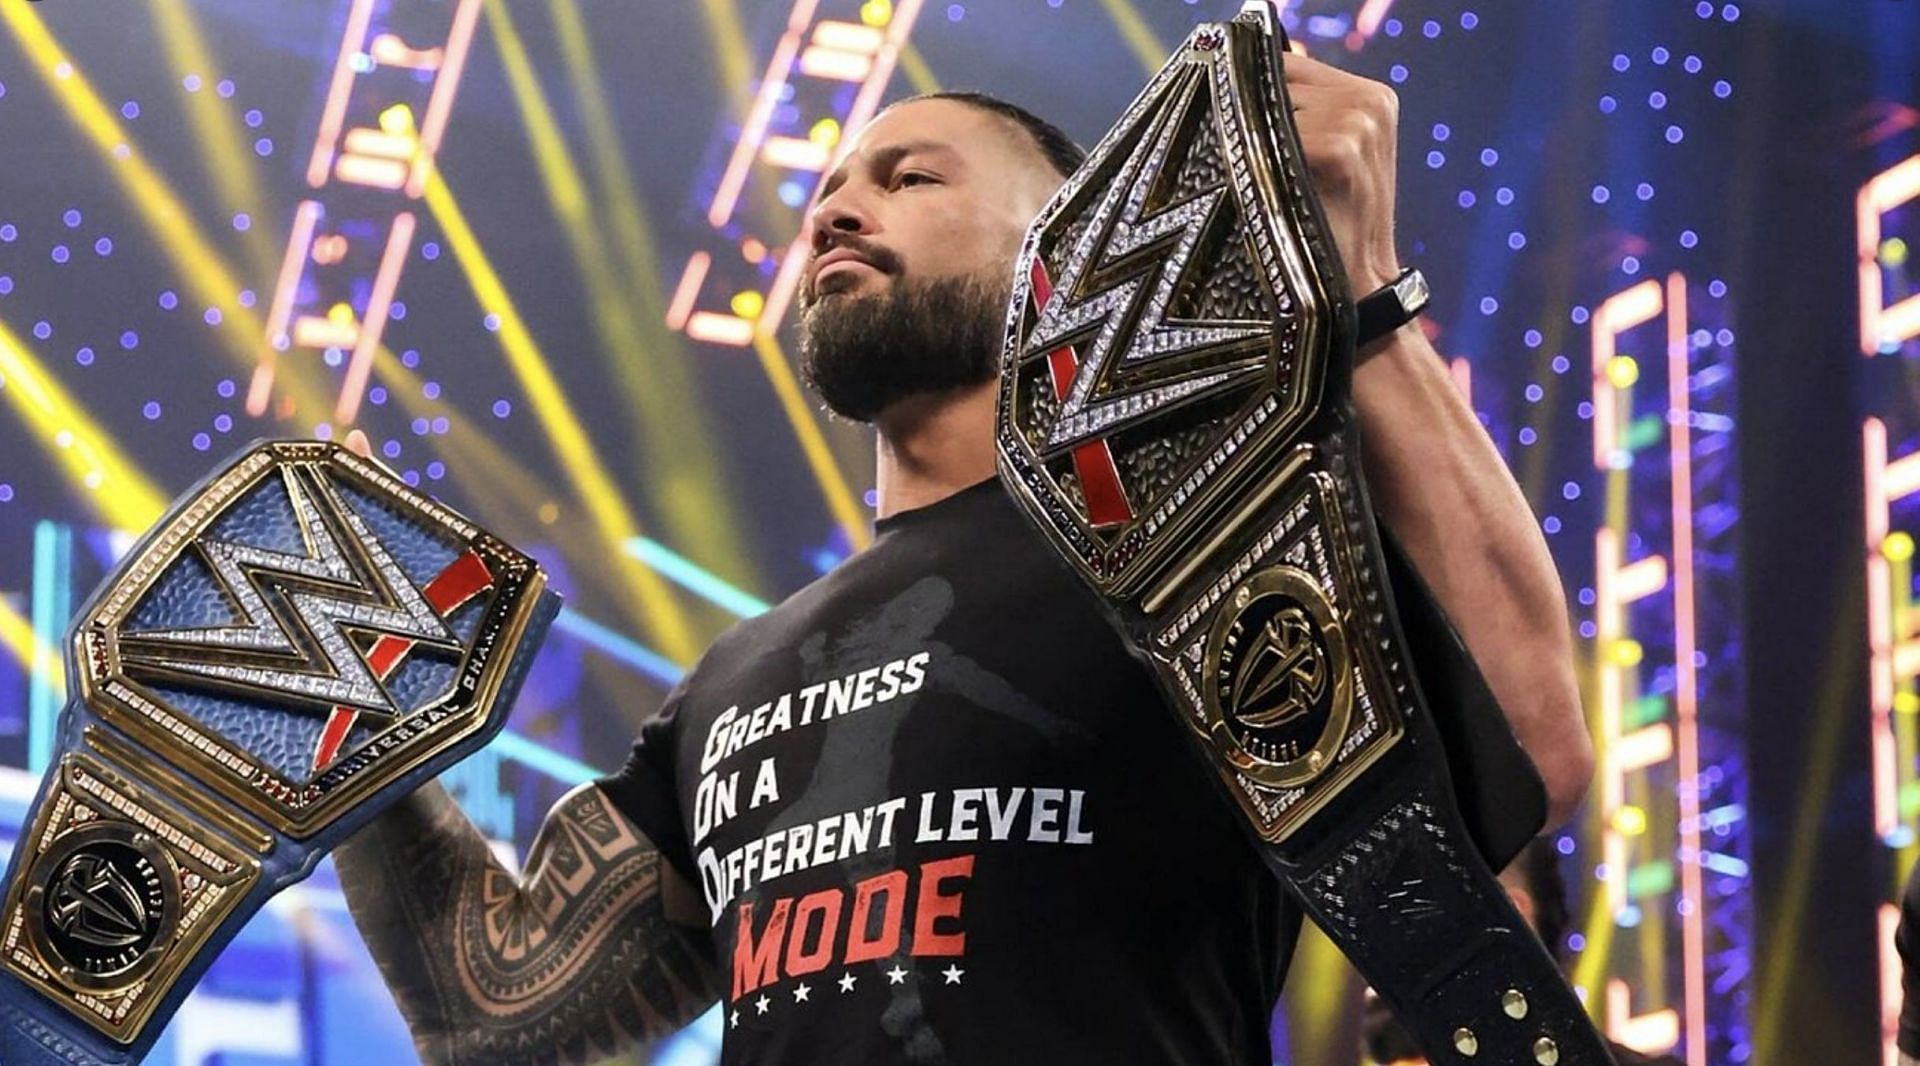 Mr. God Mode will not defend his titles at Hell in a Cell